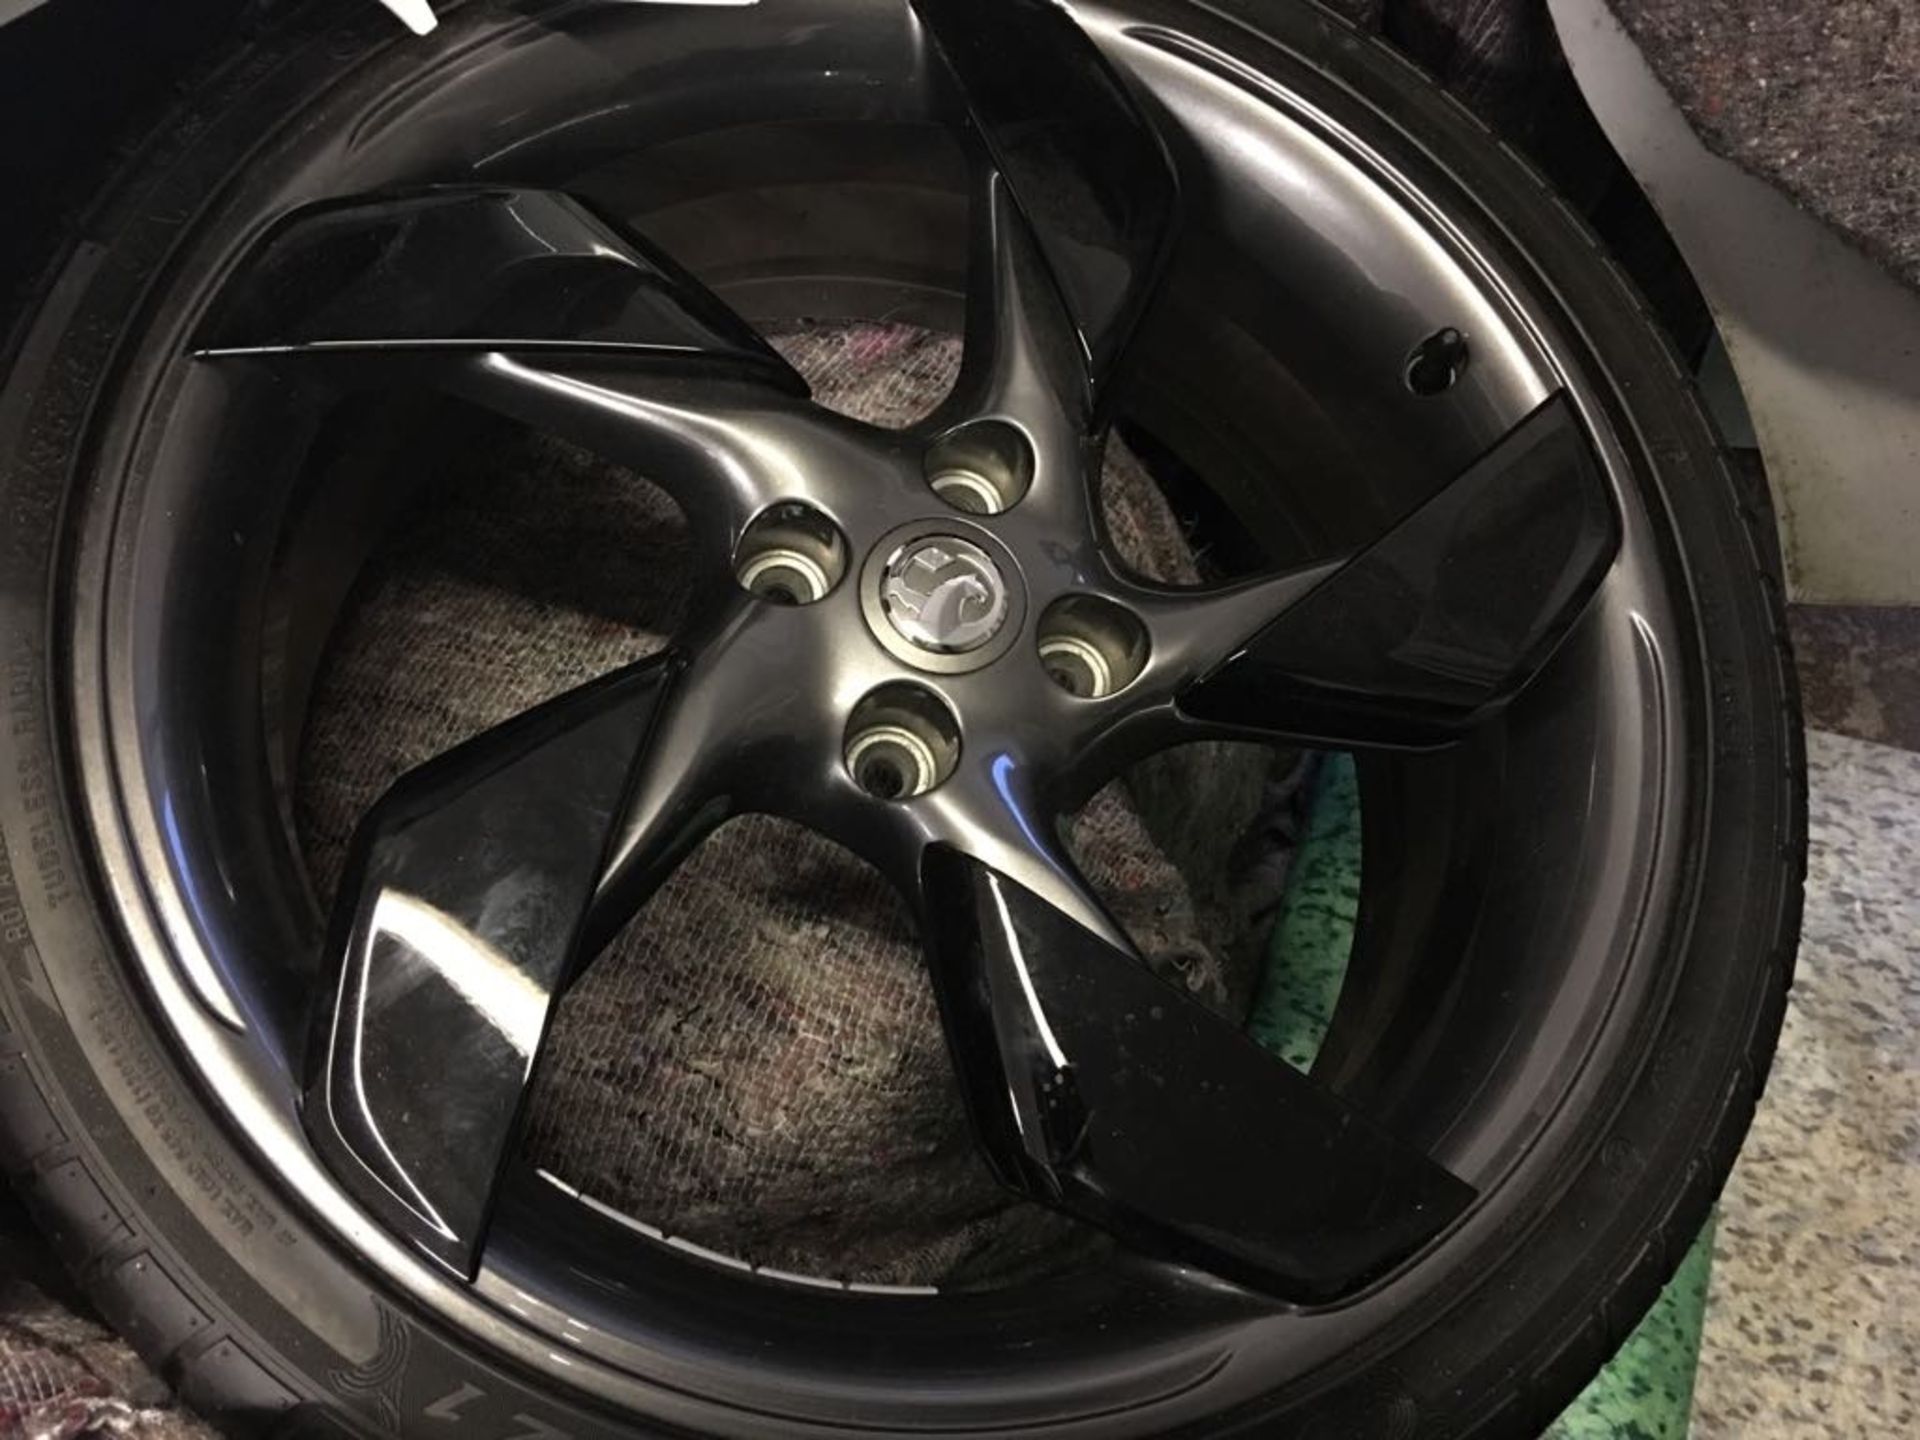 NEW VAUXHALL SPORTS ALLOY WHEELS WITH TYRES 225/35/18